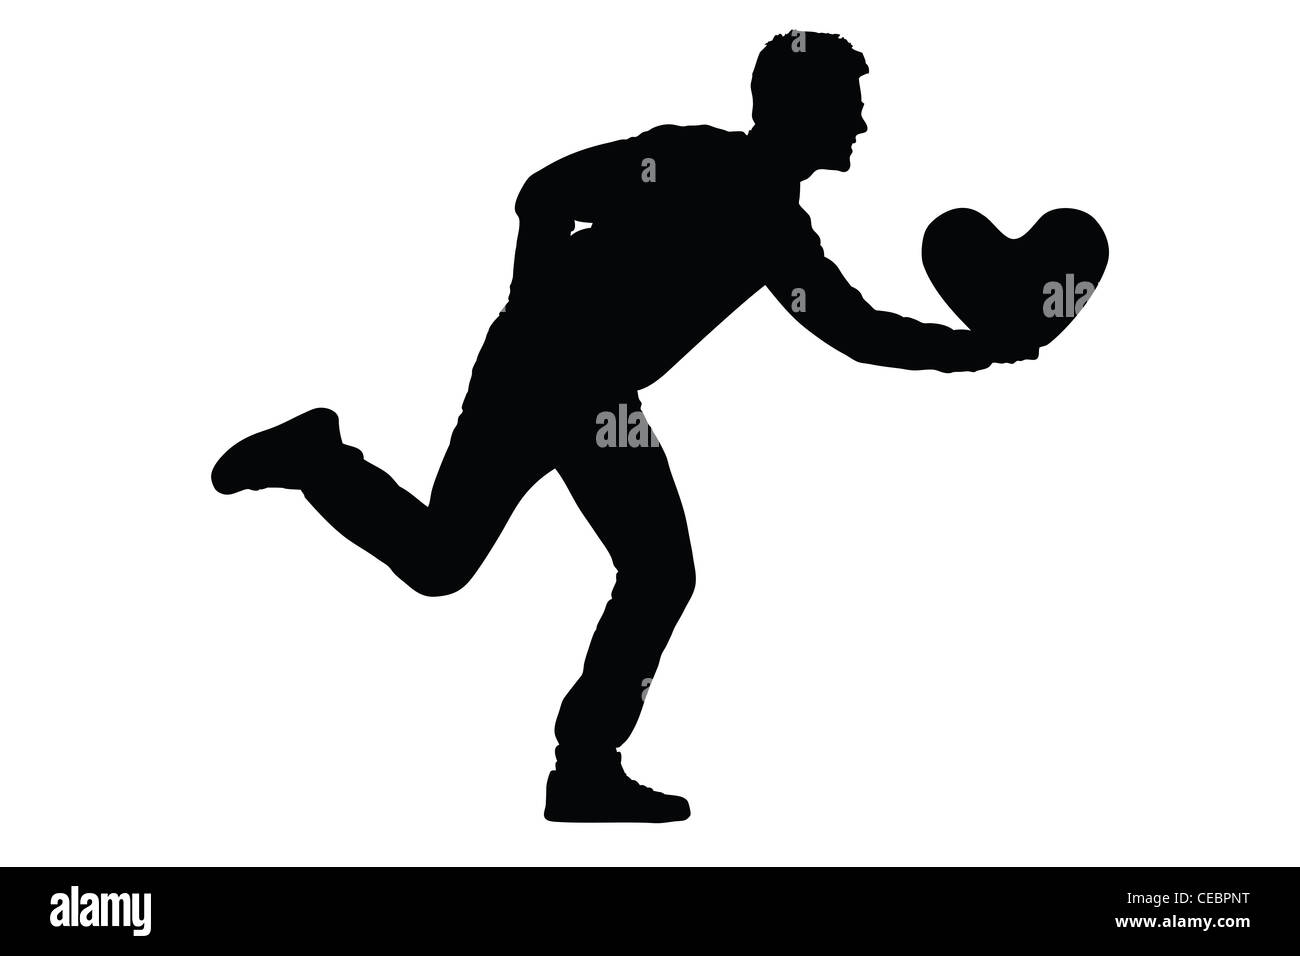 Silhouette of a man running, holding a heart Stock Photo